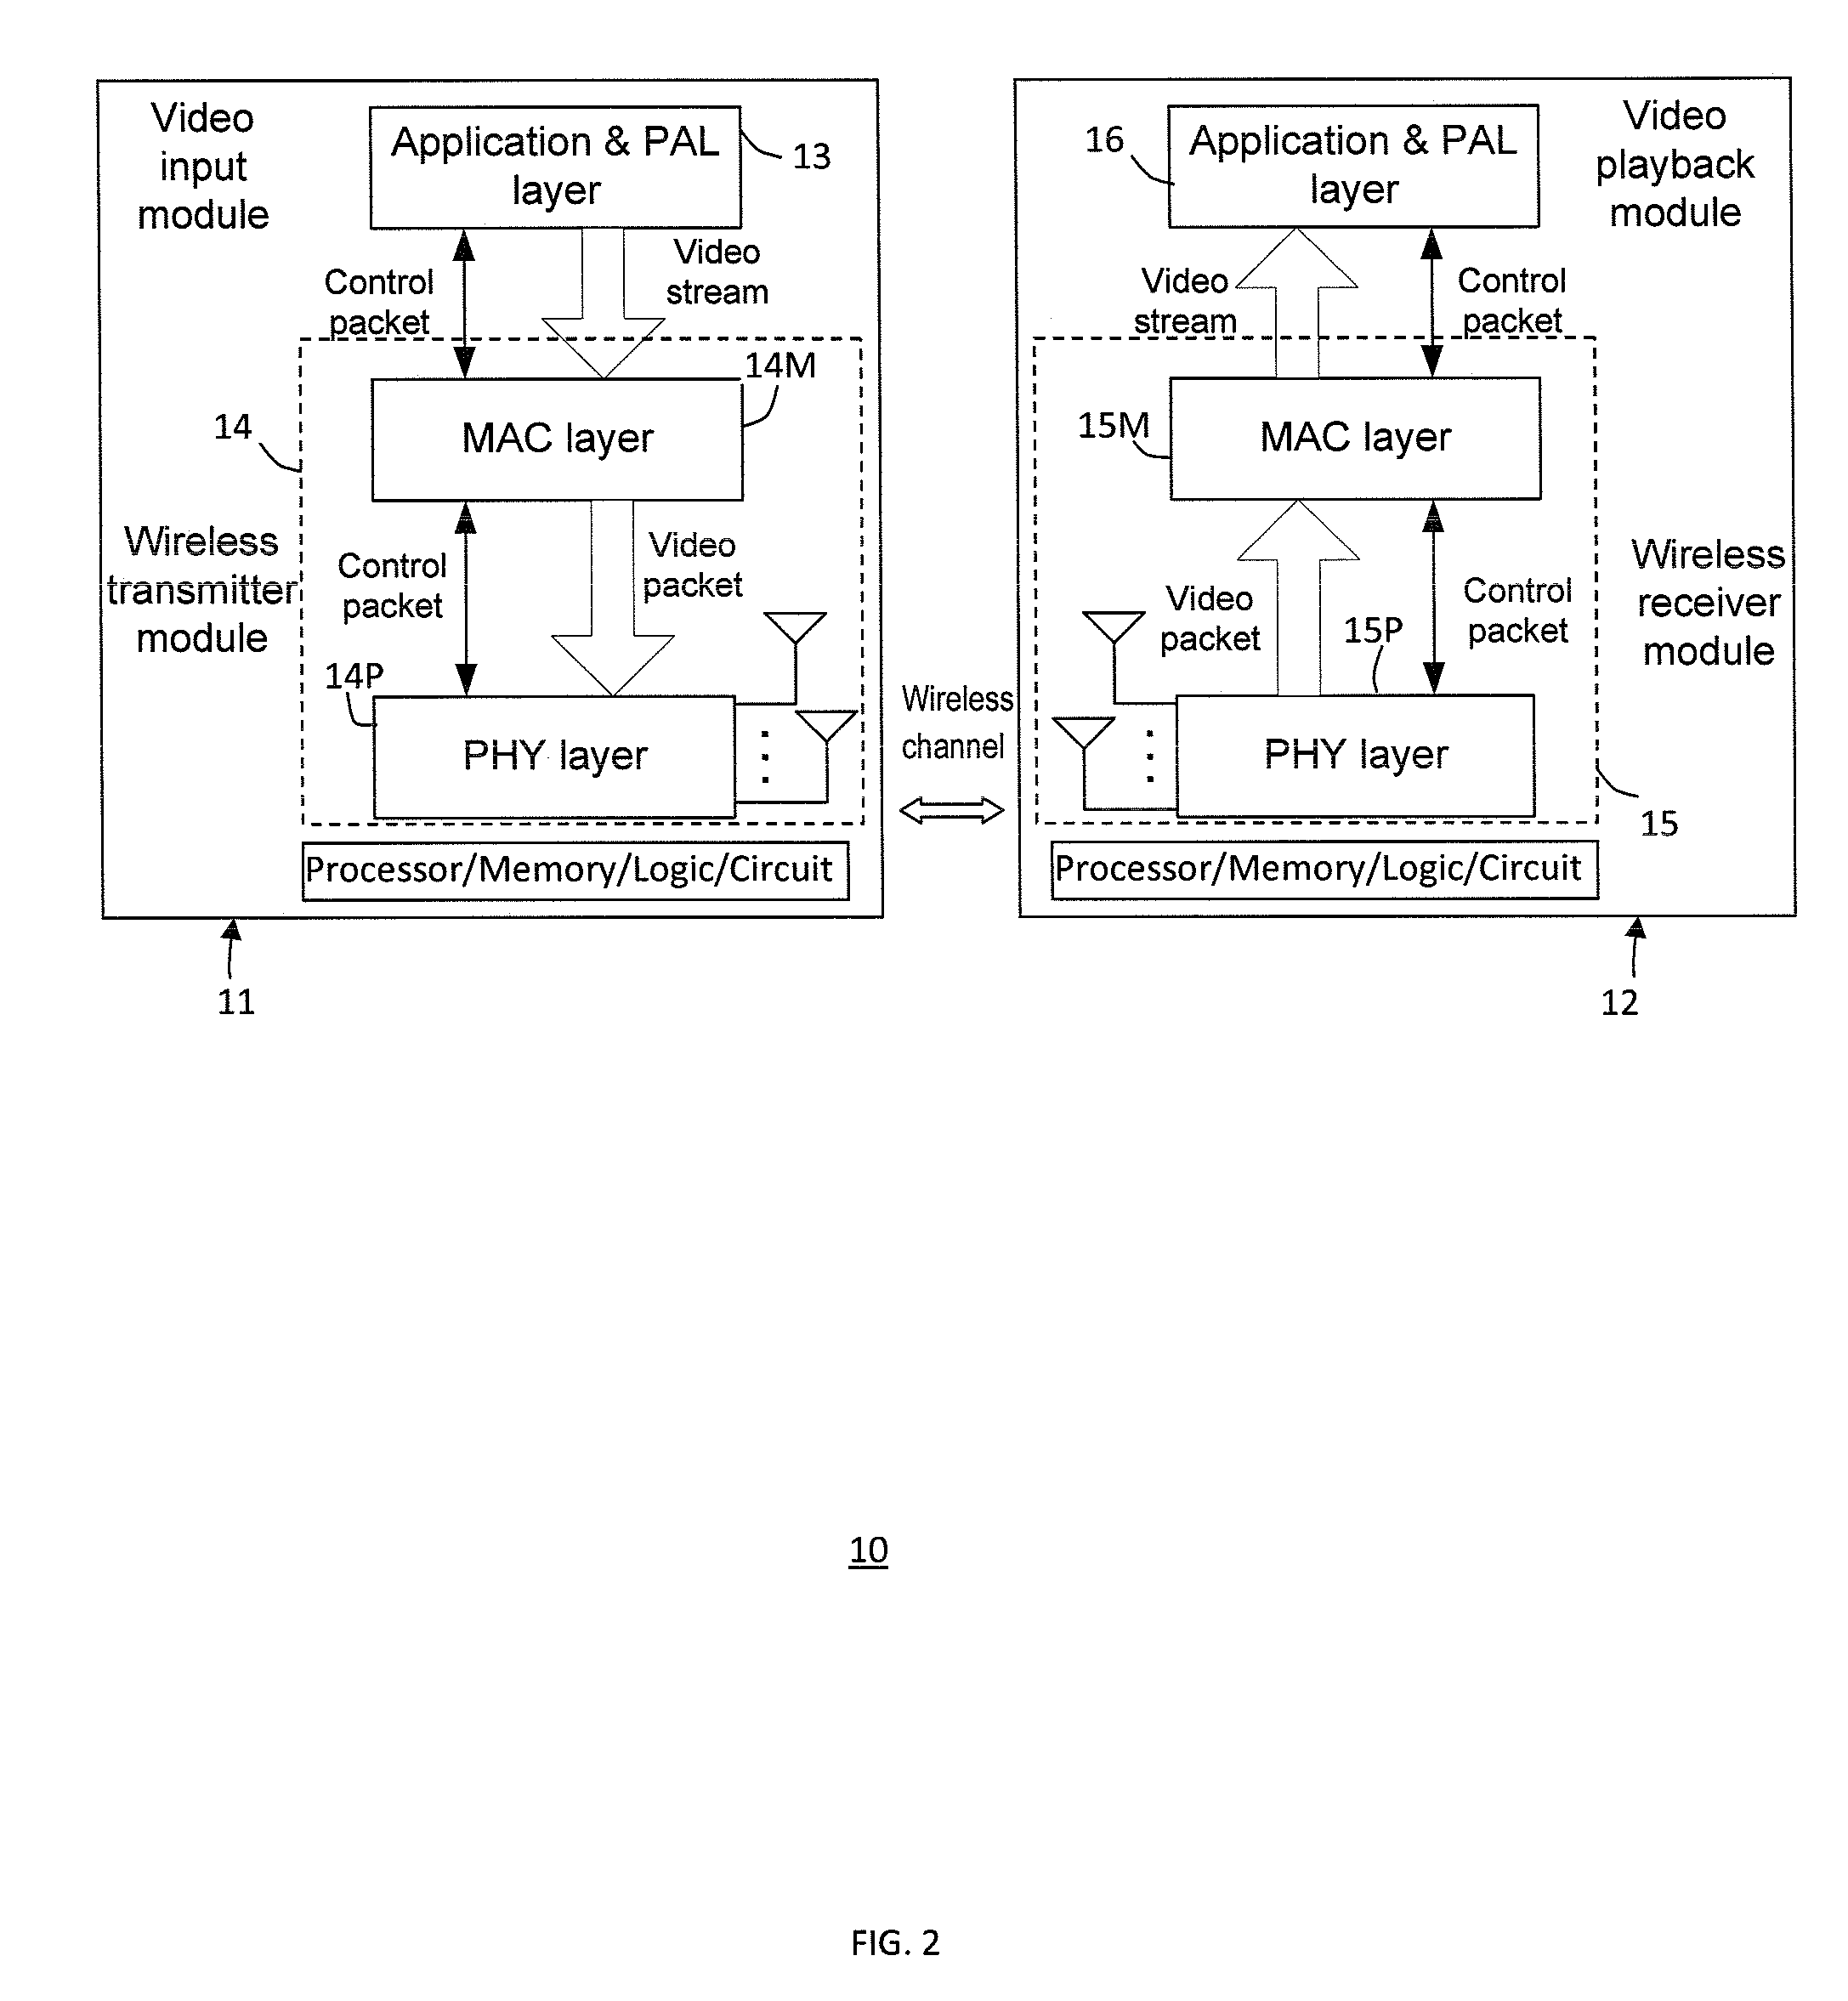 Method and system for progressive rate adaptation for uncompressed video communication in wireless systems